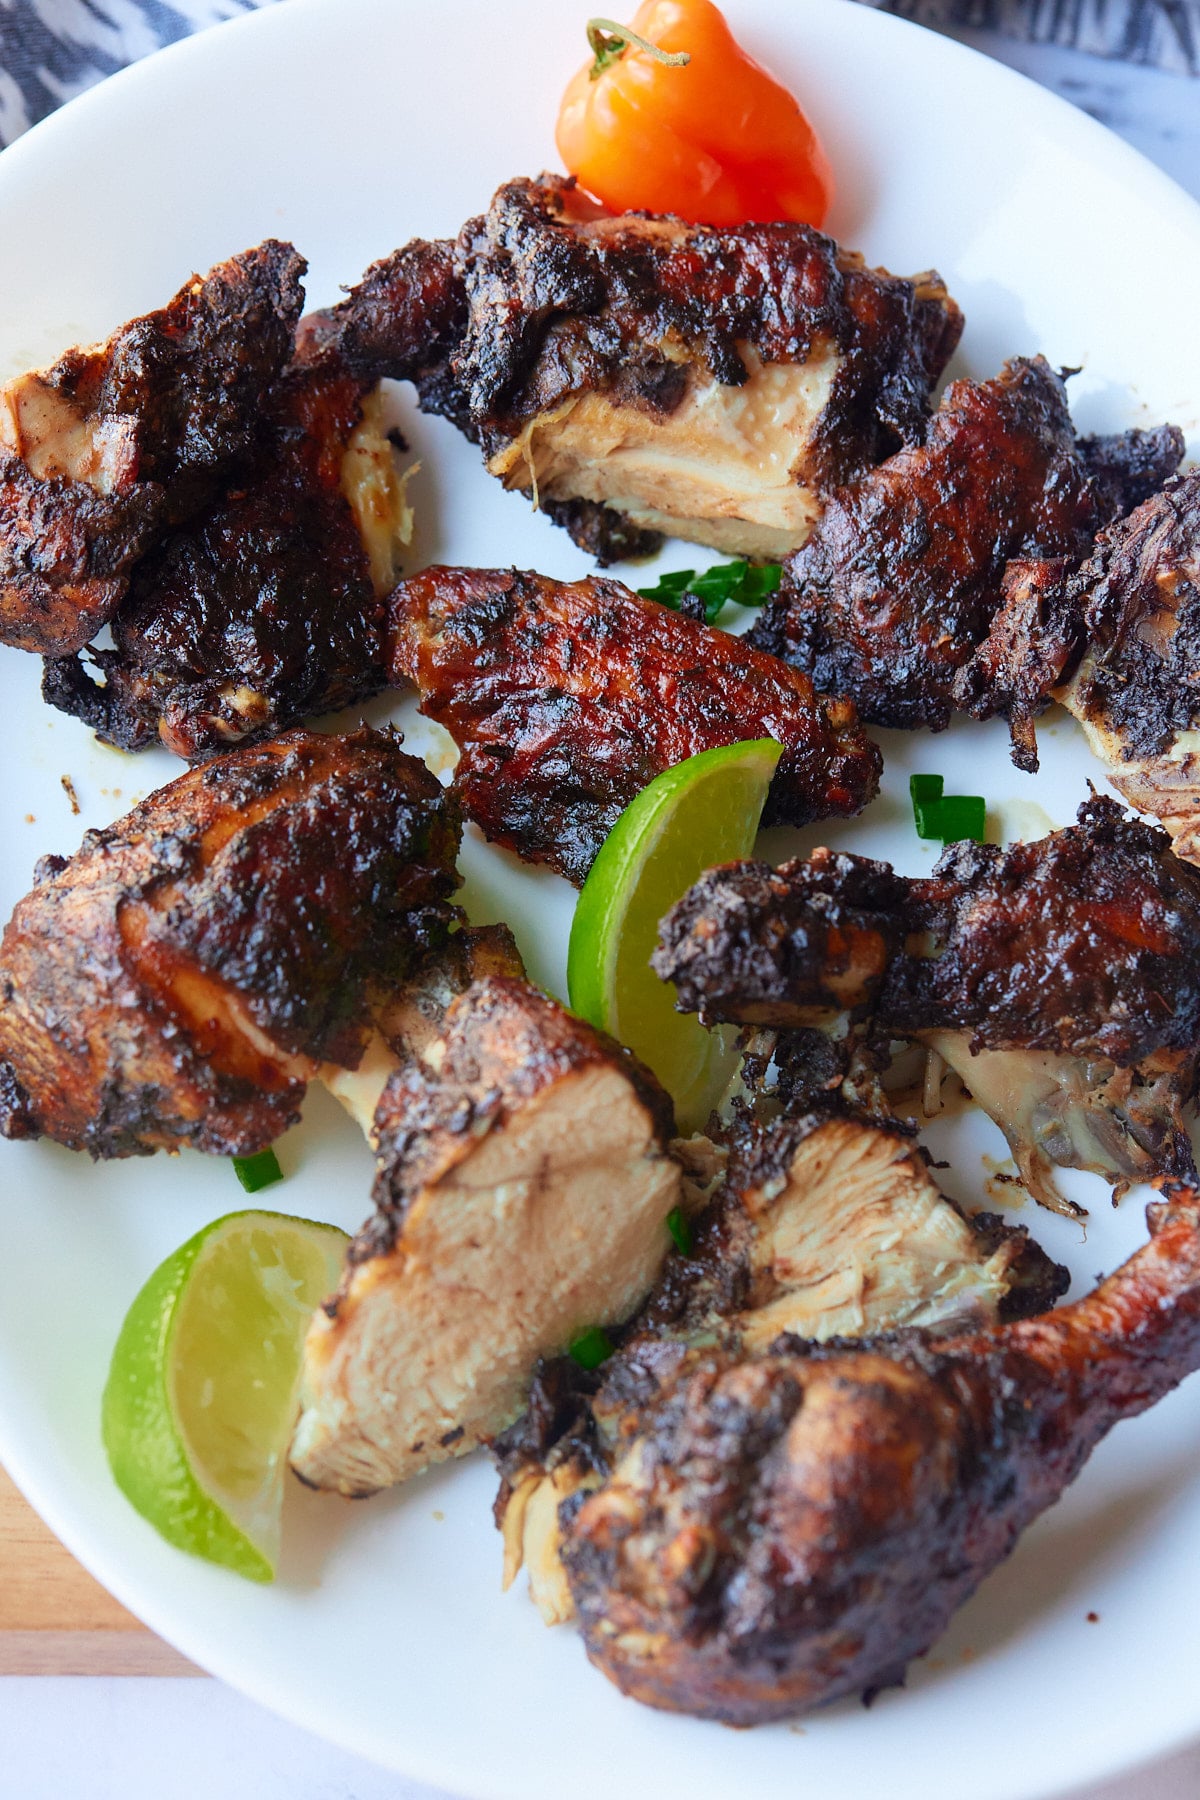 Chopped Jamaican jerk chicken served on a plate with lime wedges.